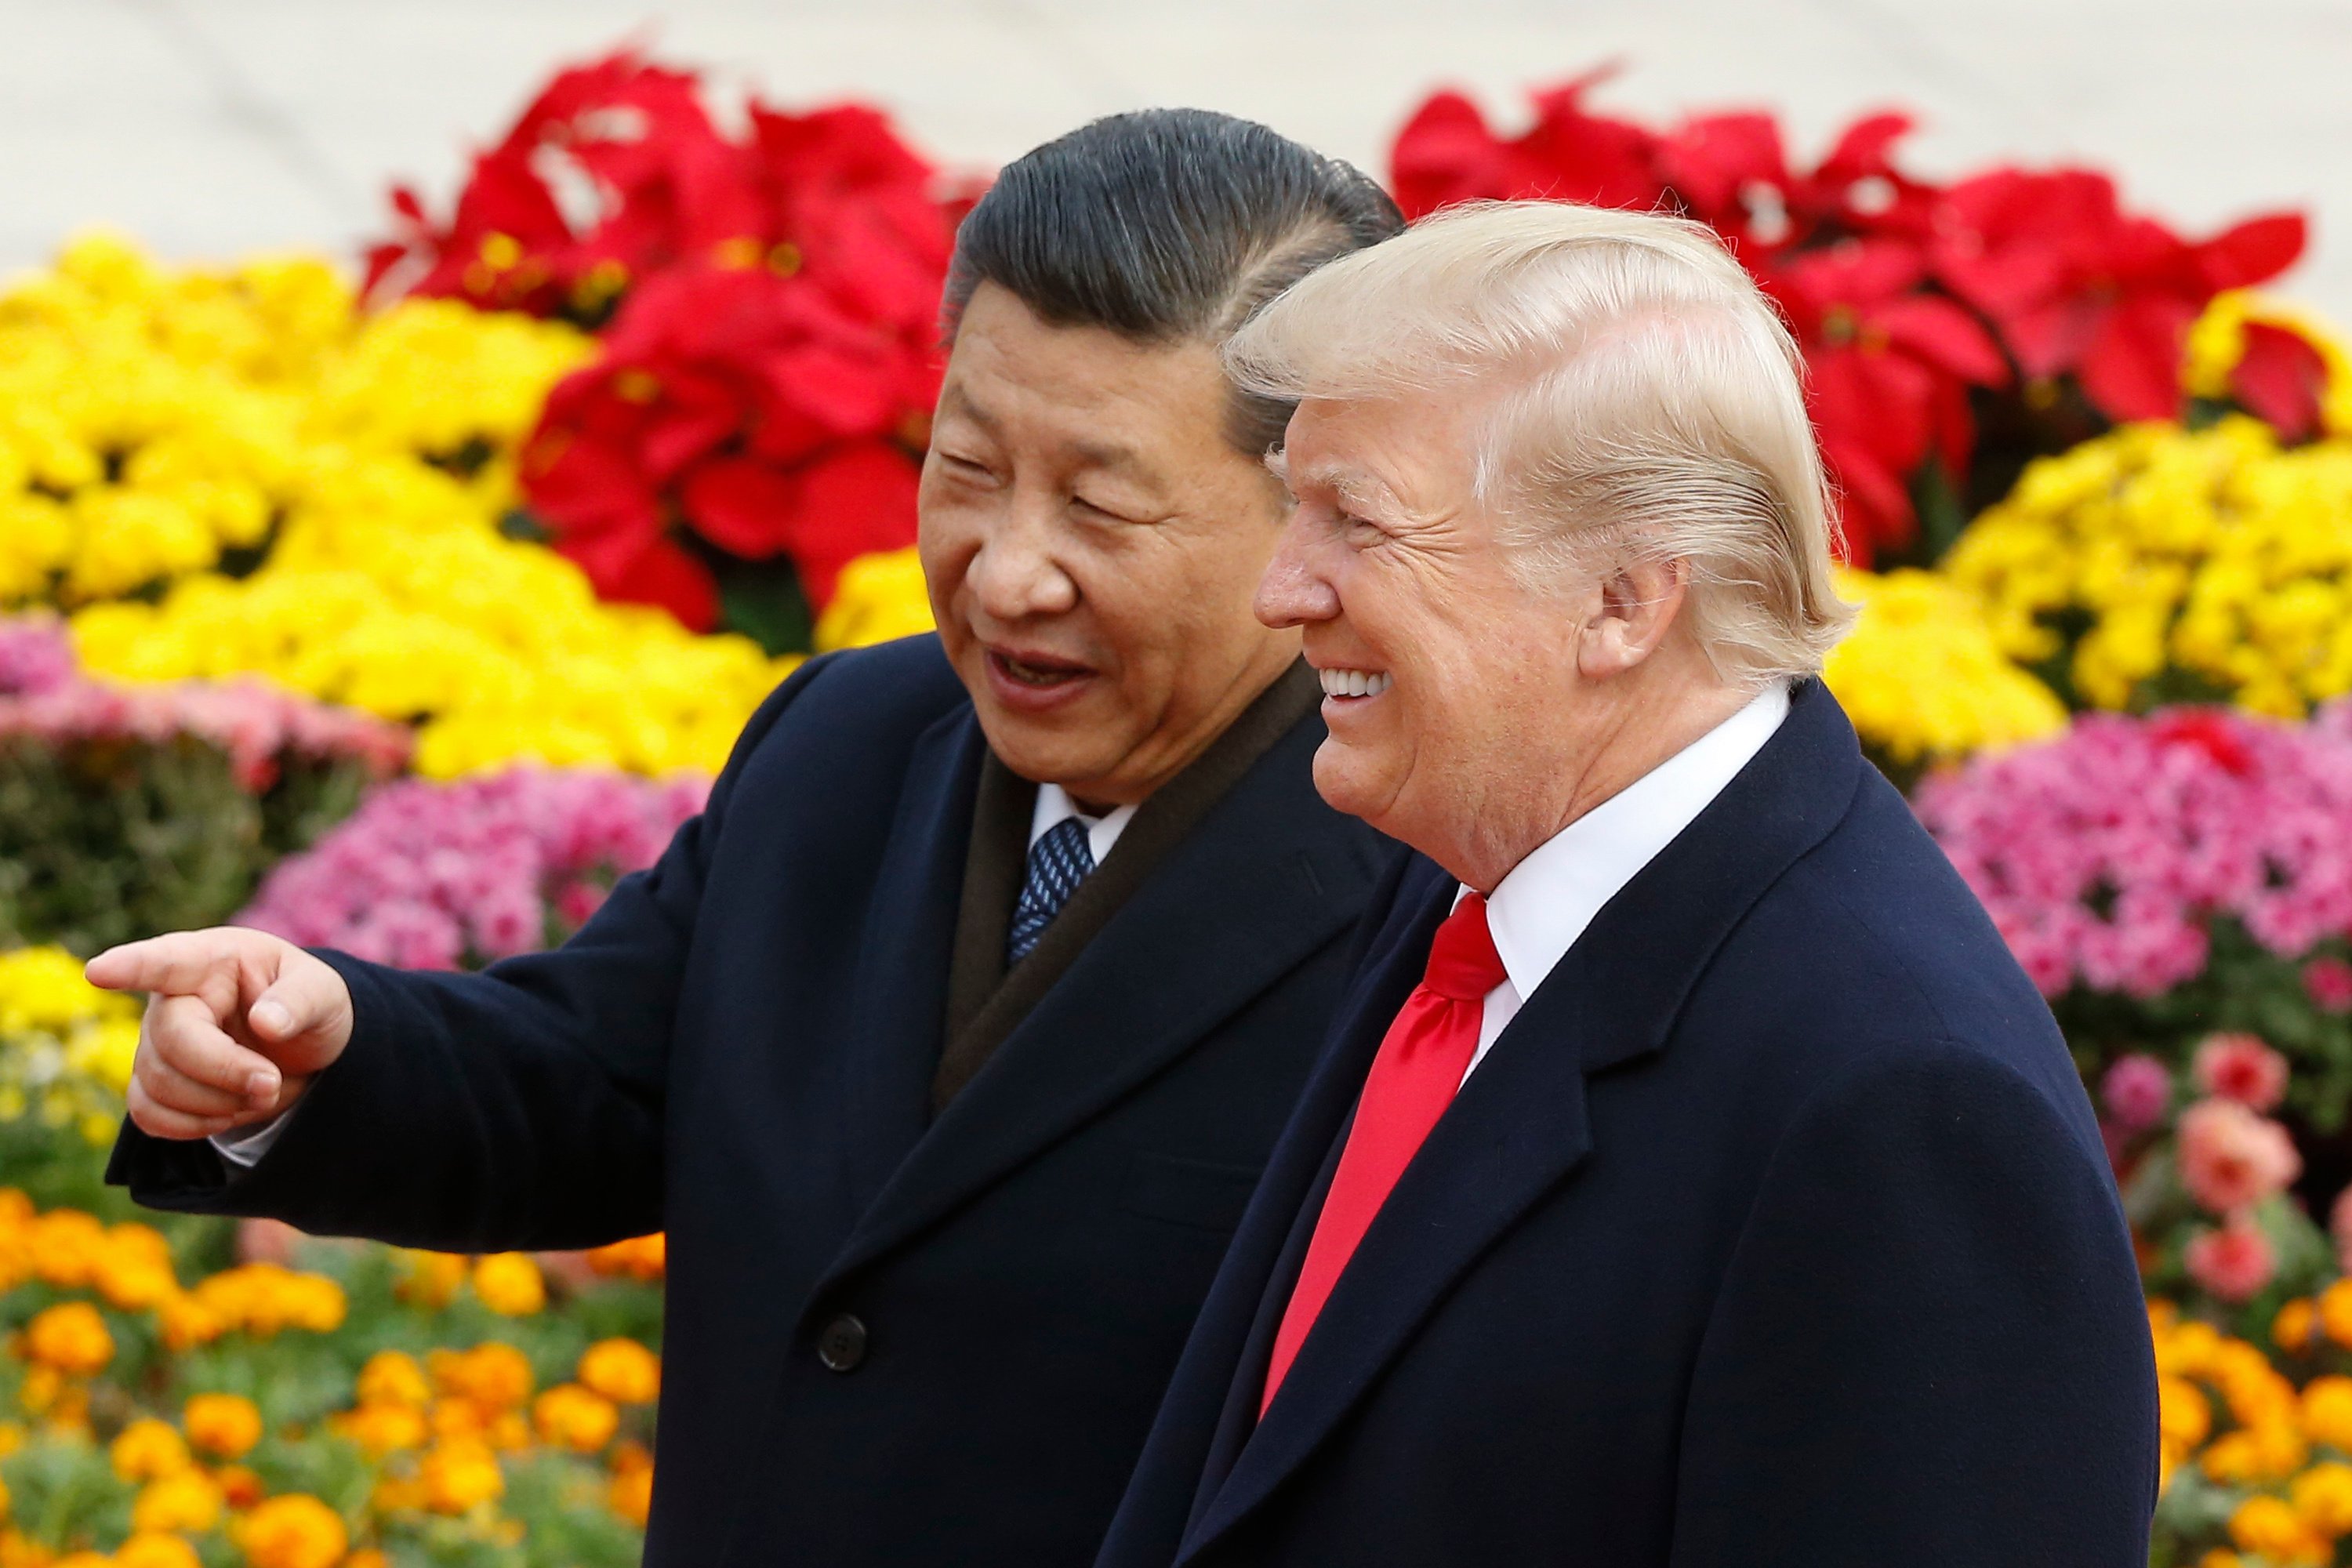 BEIJING, CHINA - NOVEMBER 9: Chinese President Xi Jinping and U.S. President Donald Trump attend a welcoming ceremony November 9, 2017 in Beijing, China. Trump is on a 10-day trip to Asia. (Photo by Thomas Peter-Pool/Getty Images)